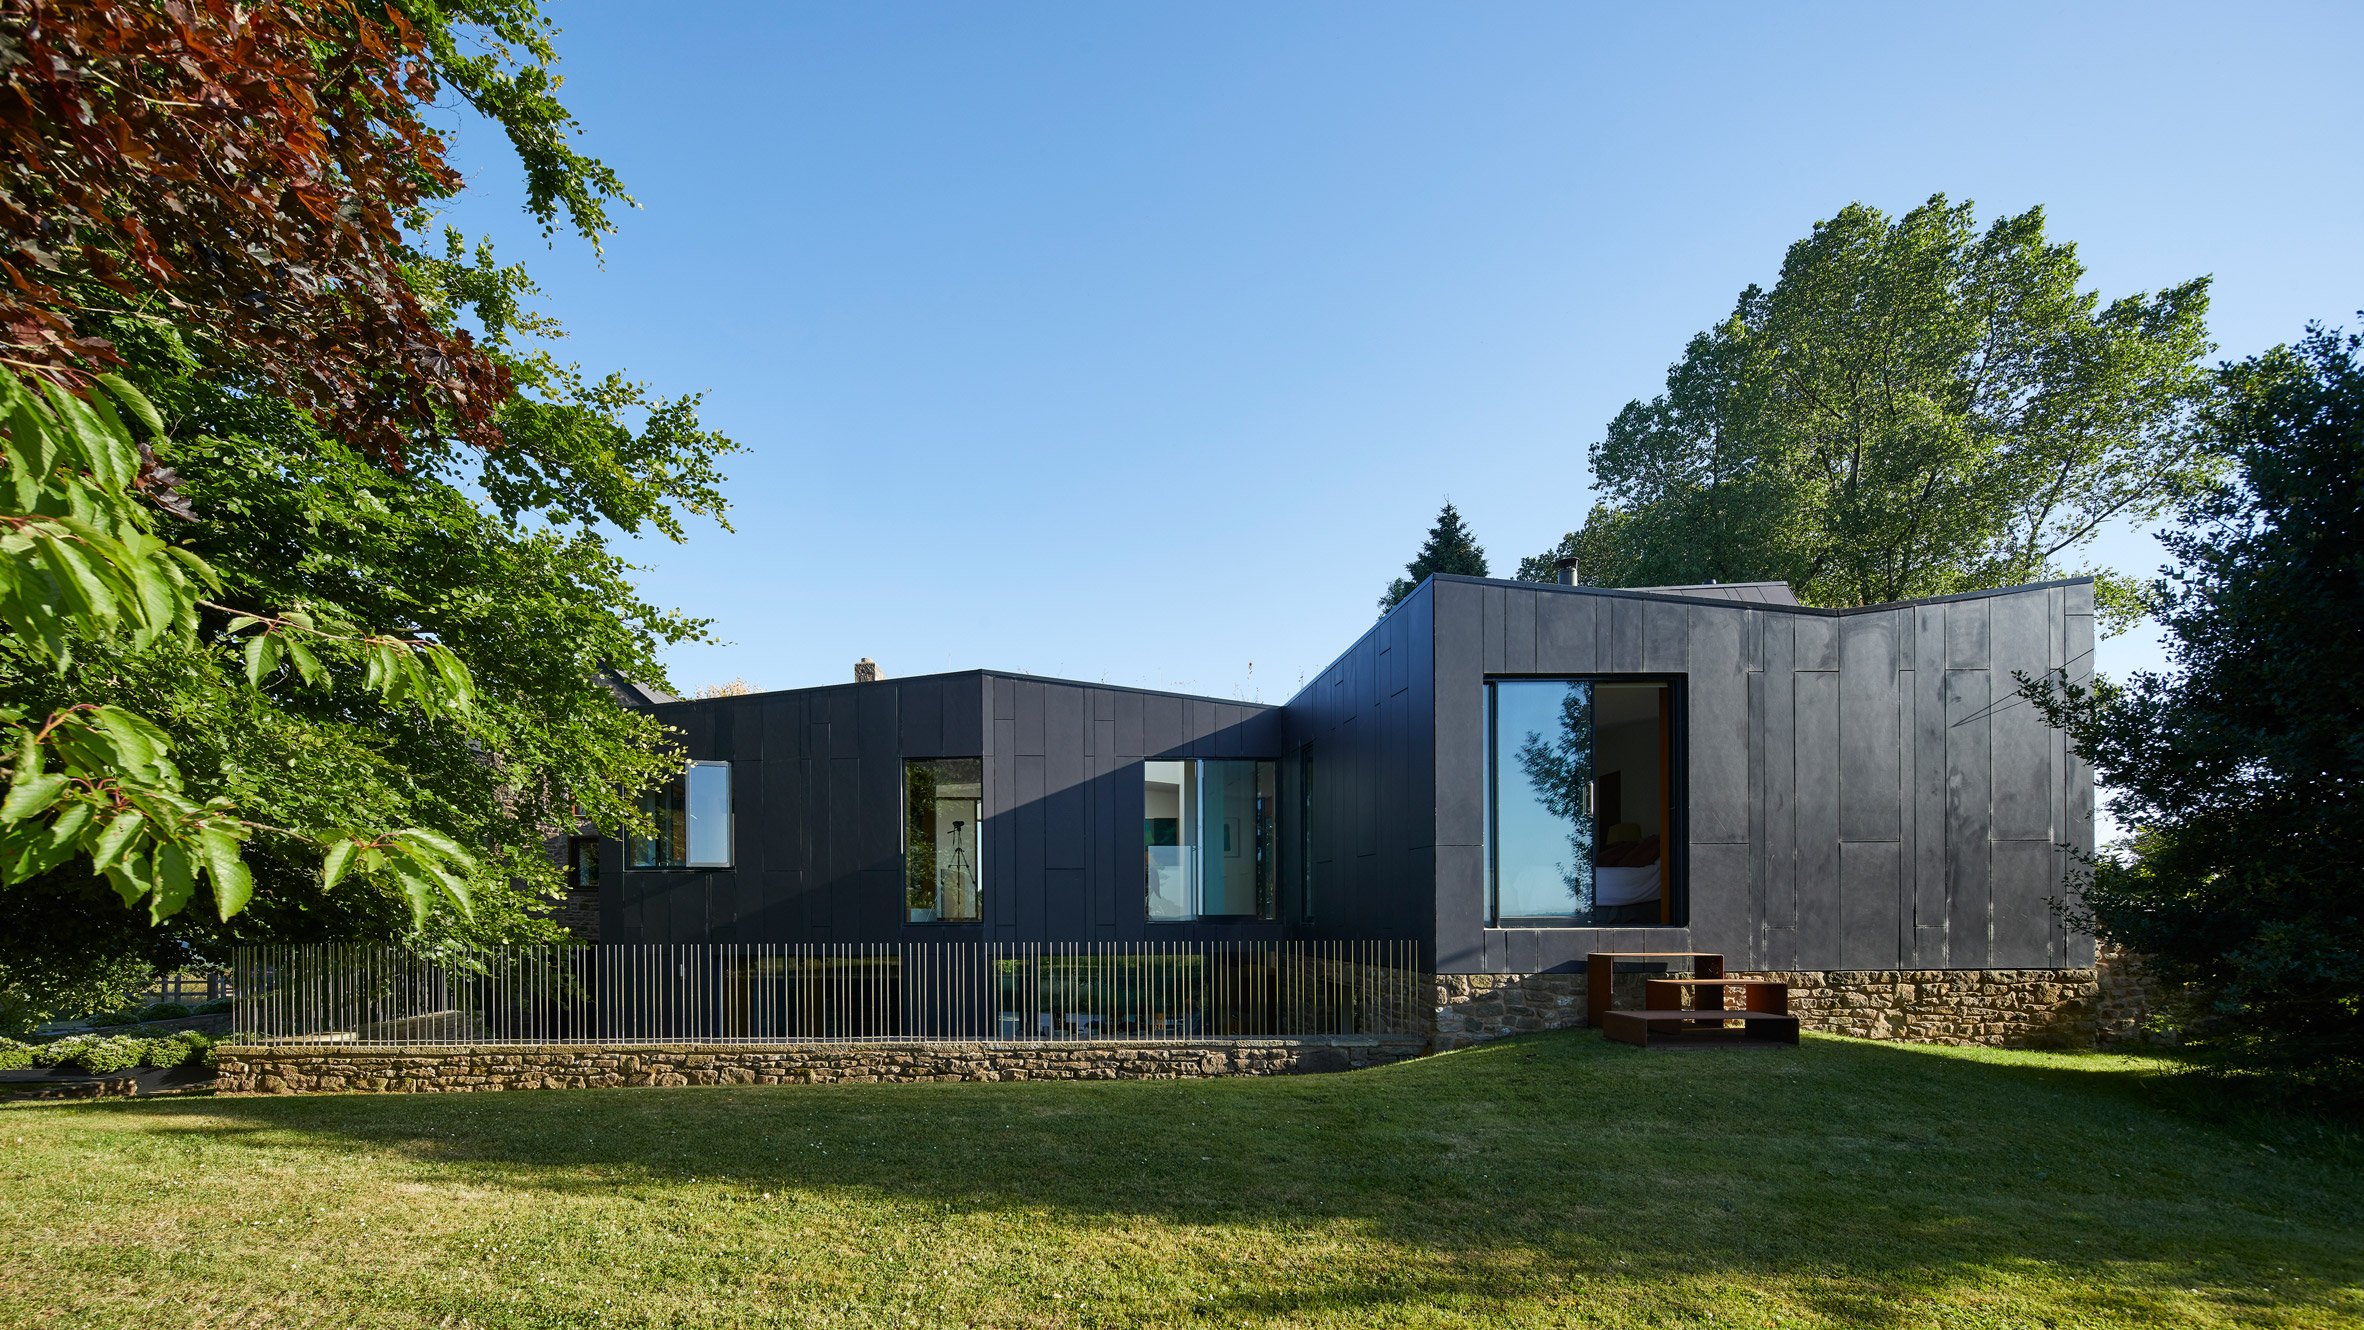 House on the Hill by Alison Brooks Architects has been named RIBA House of the Year